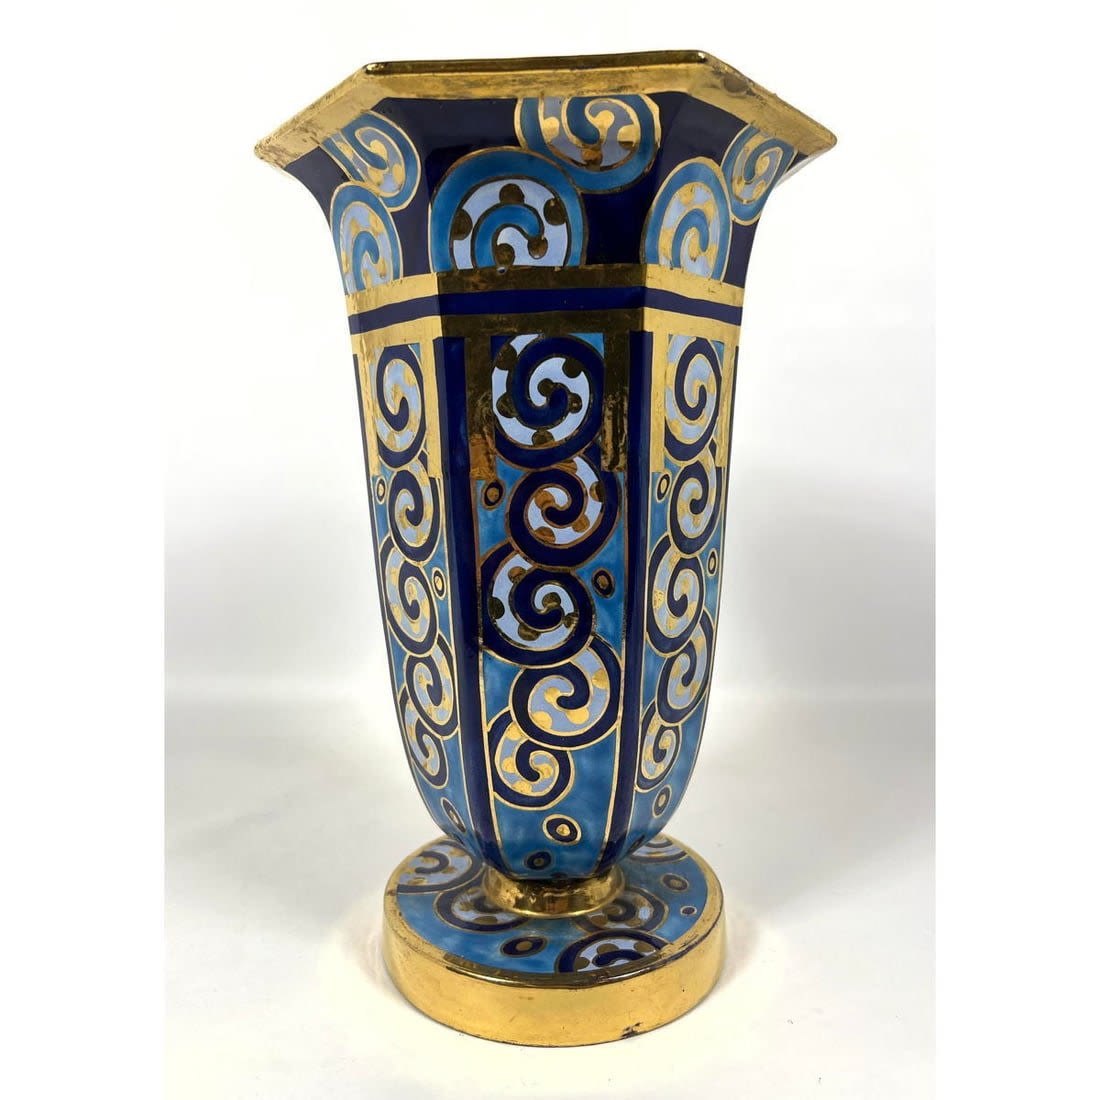 Ceramic Art Deco Vase with an interplay 362be2